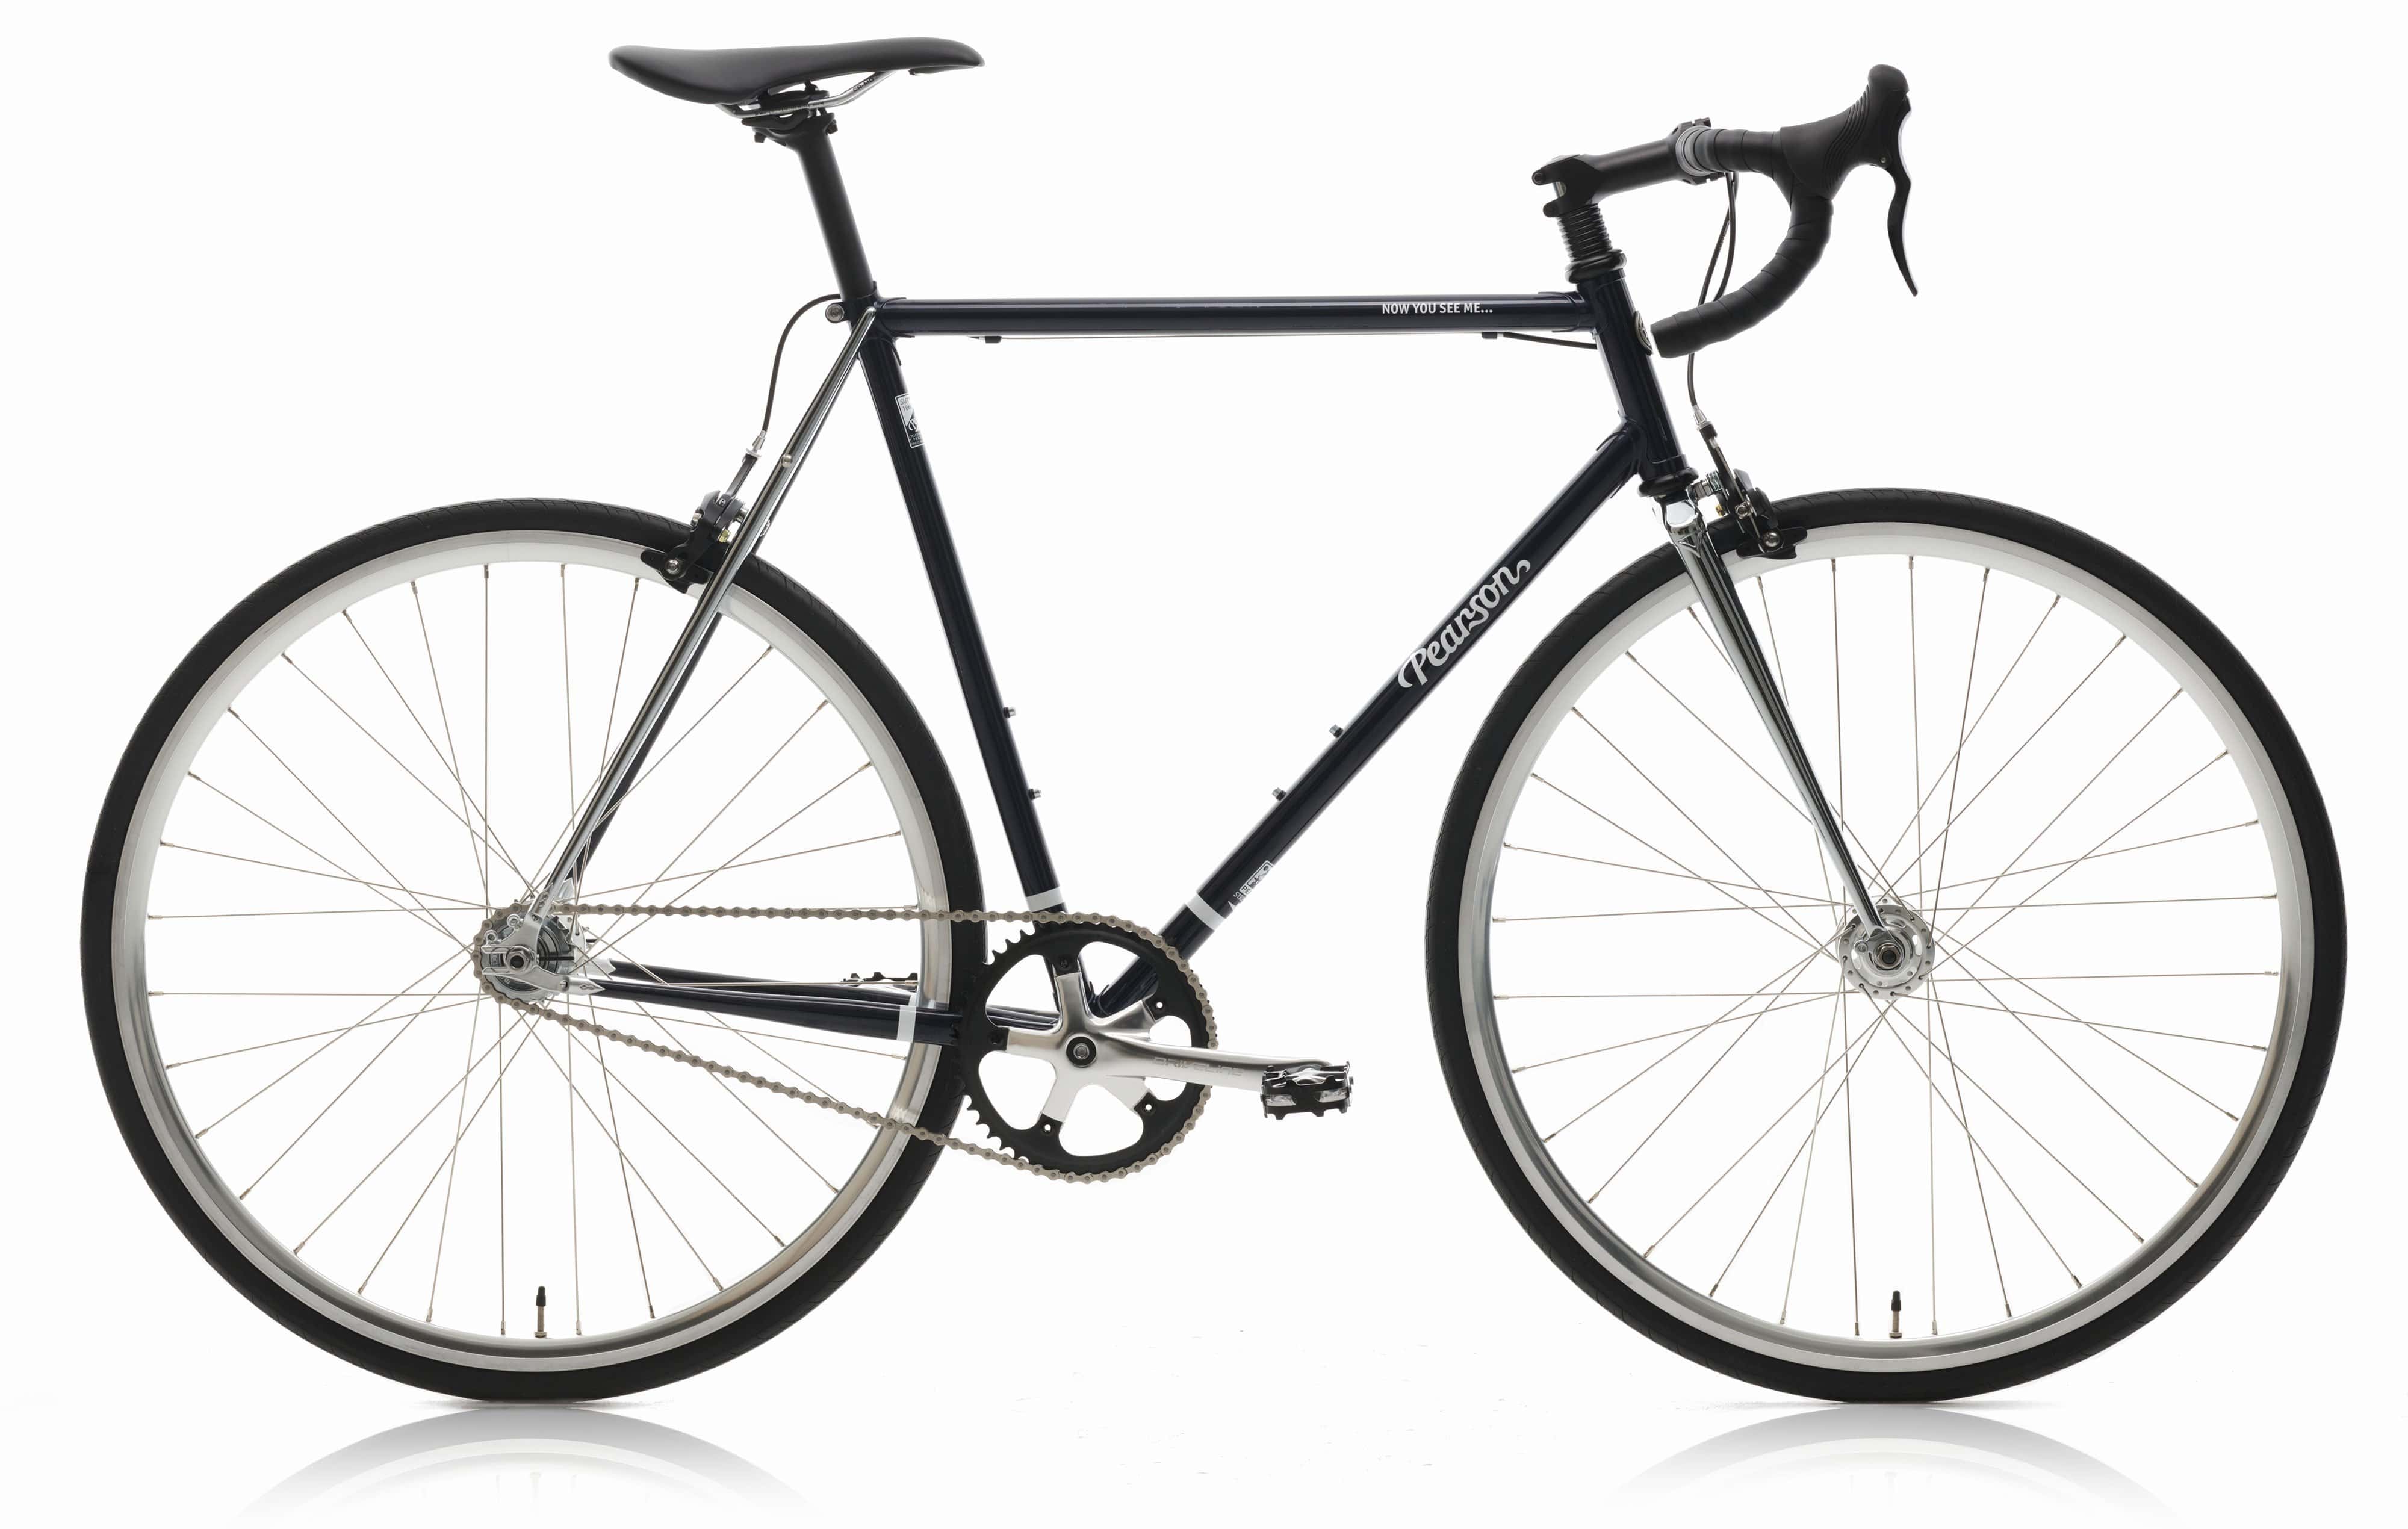 Pcs  Now You See Me - Steel Single Speed Bike  Continental Gator Hardshell 28mm / Without Mudguards / X-large